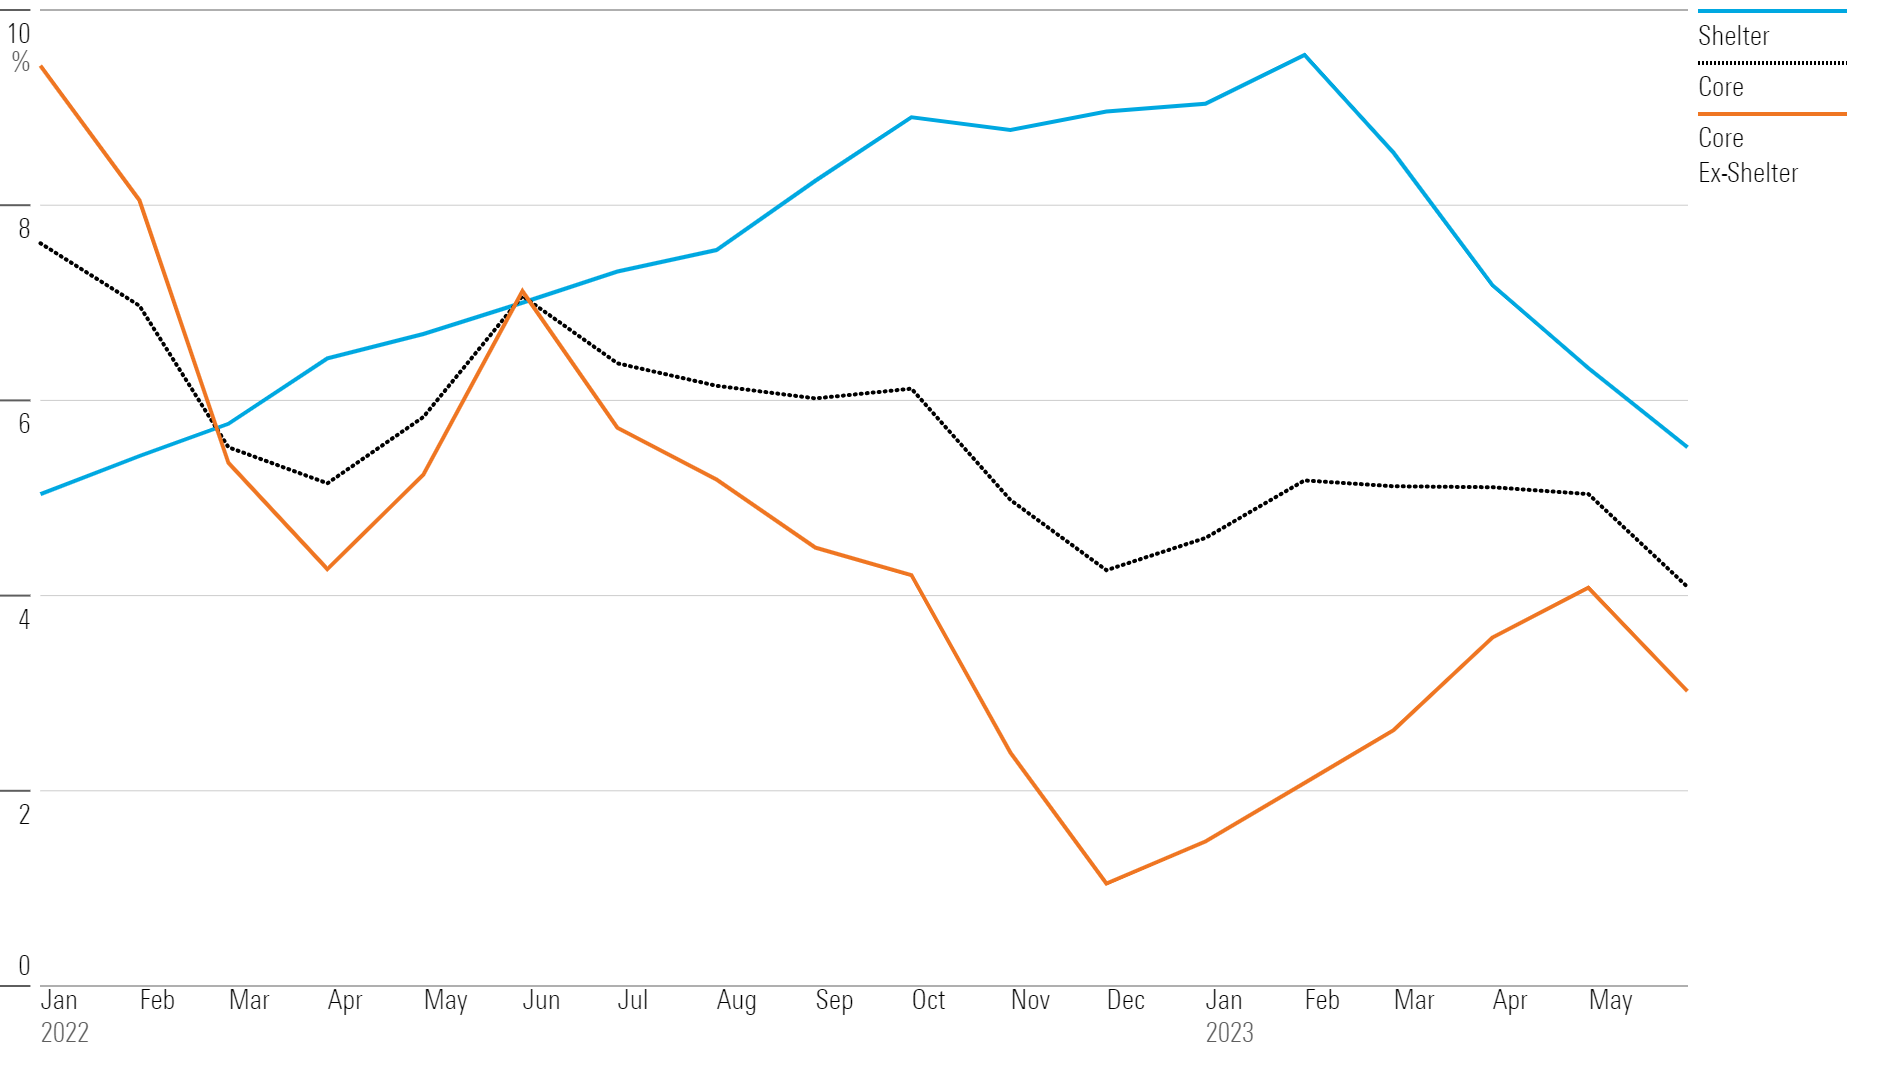 Line chart showing core CPI, shelter CPI, and core ex-shelter,